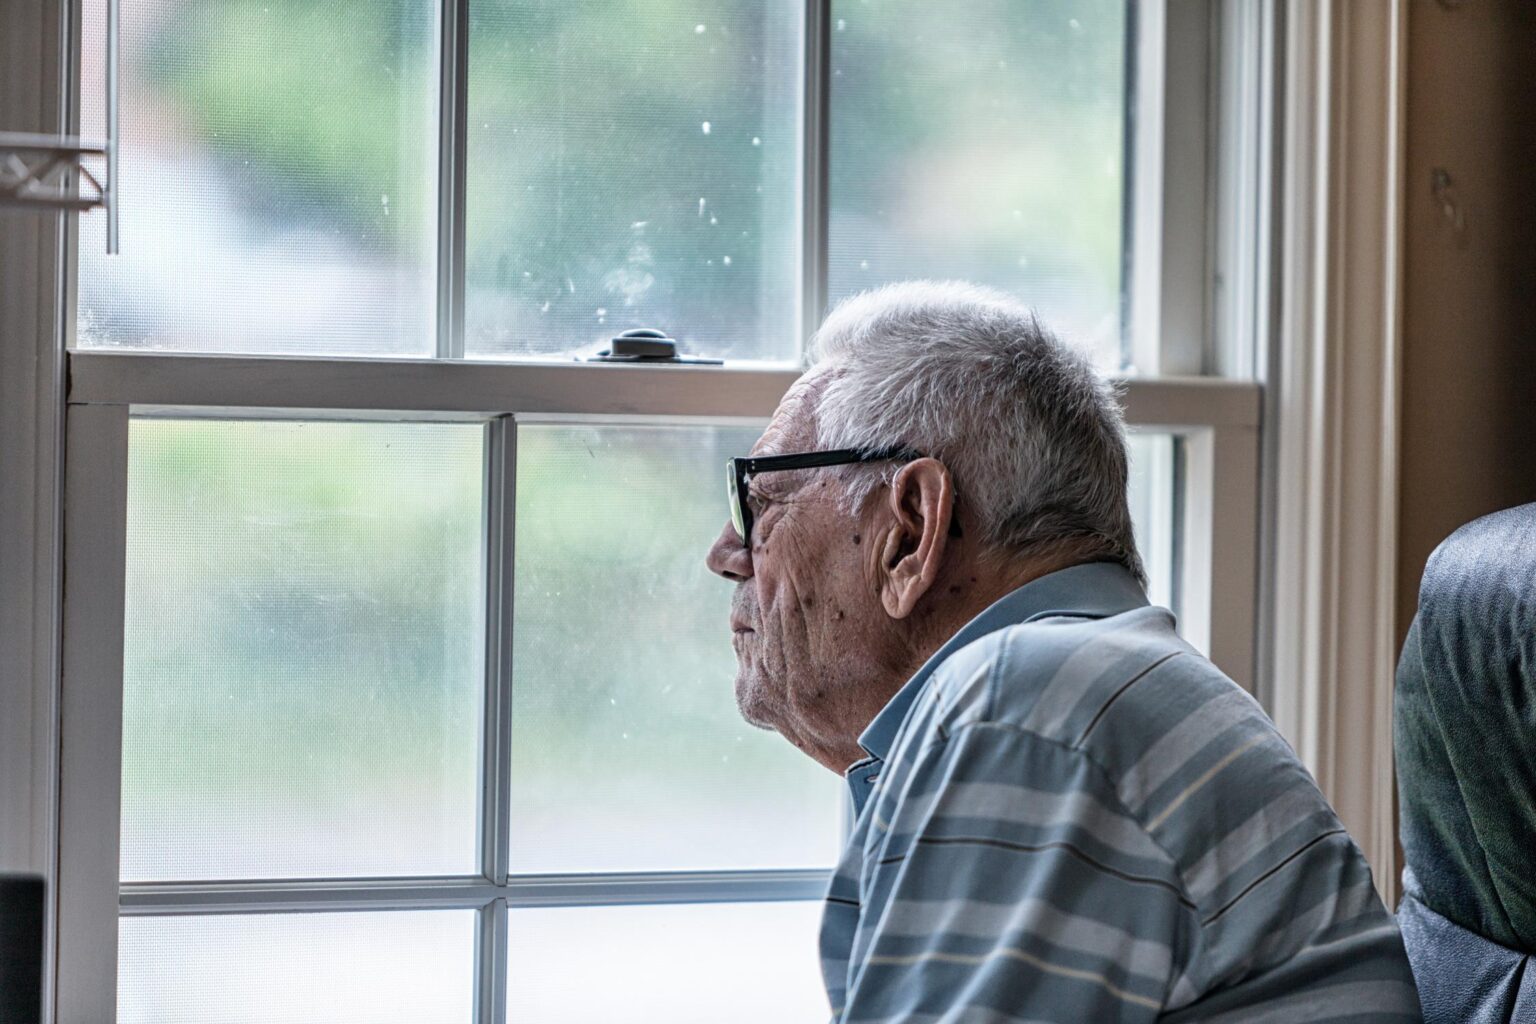 gray haired man with glasses looks out of a window